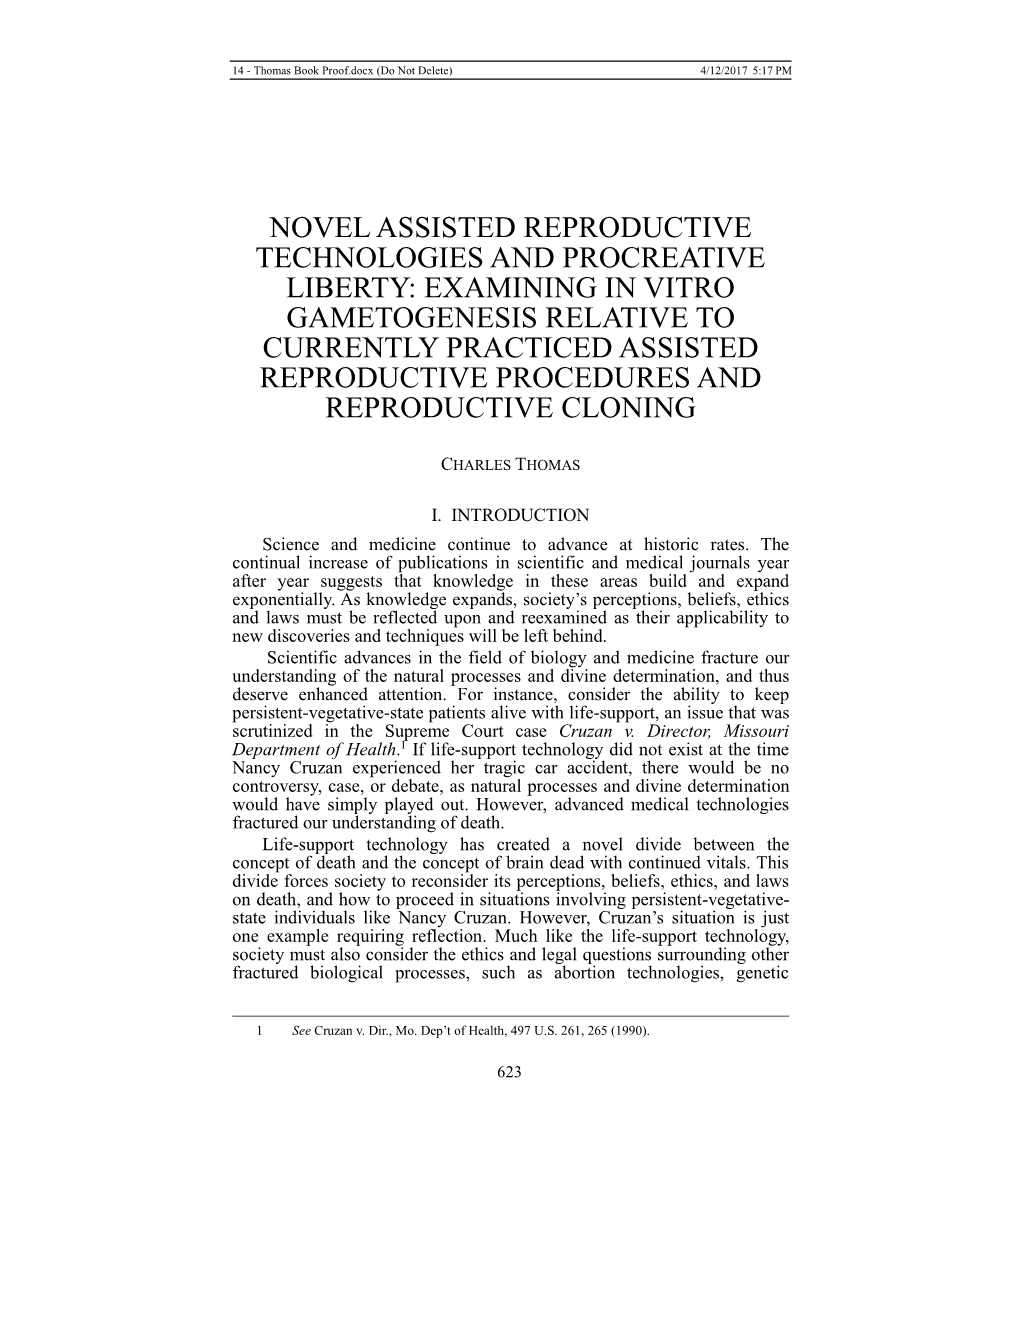 Novel Assisted Reproductive Technologies and Procreative Liberty